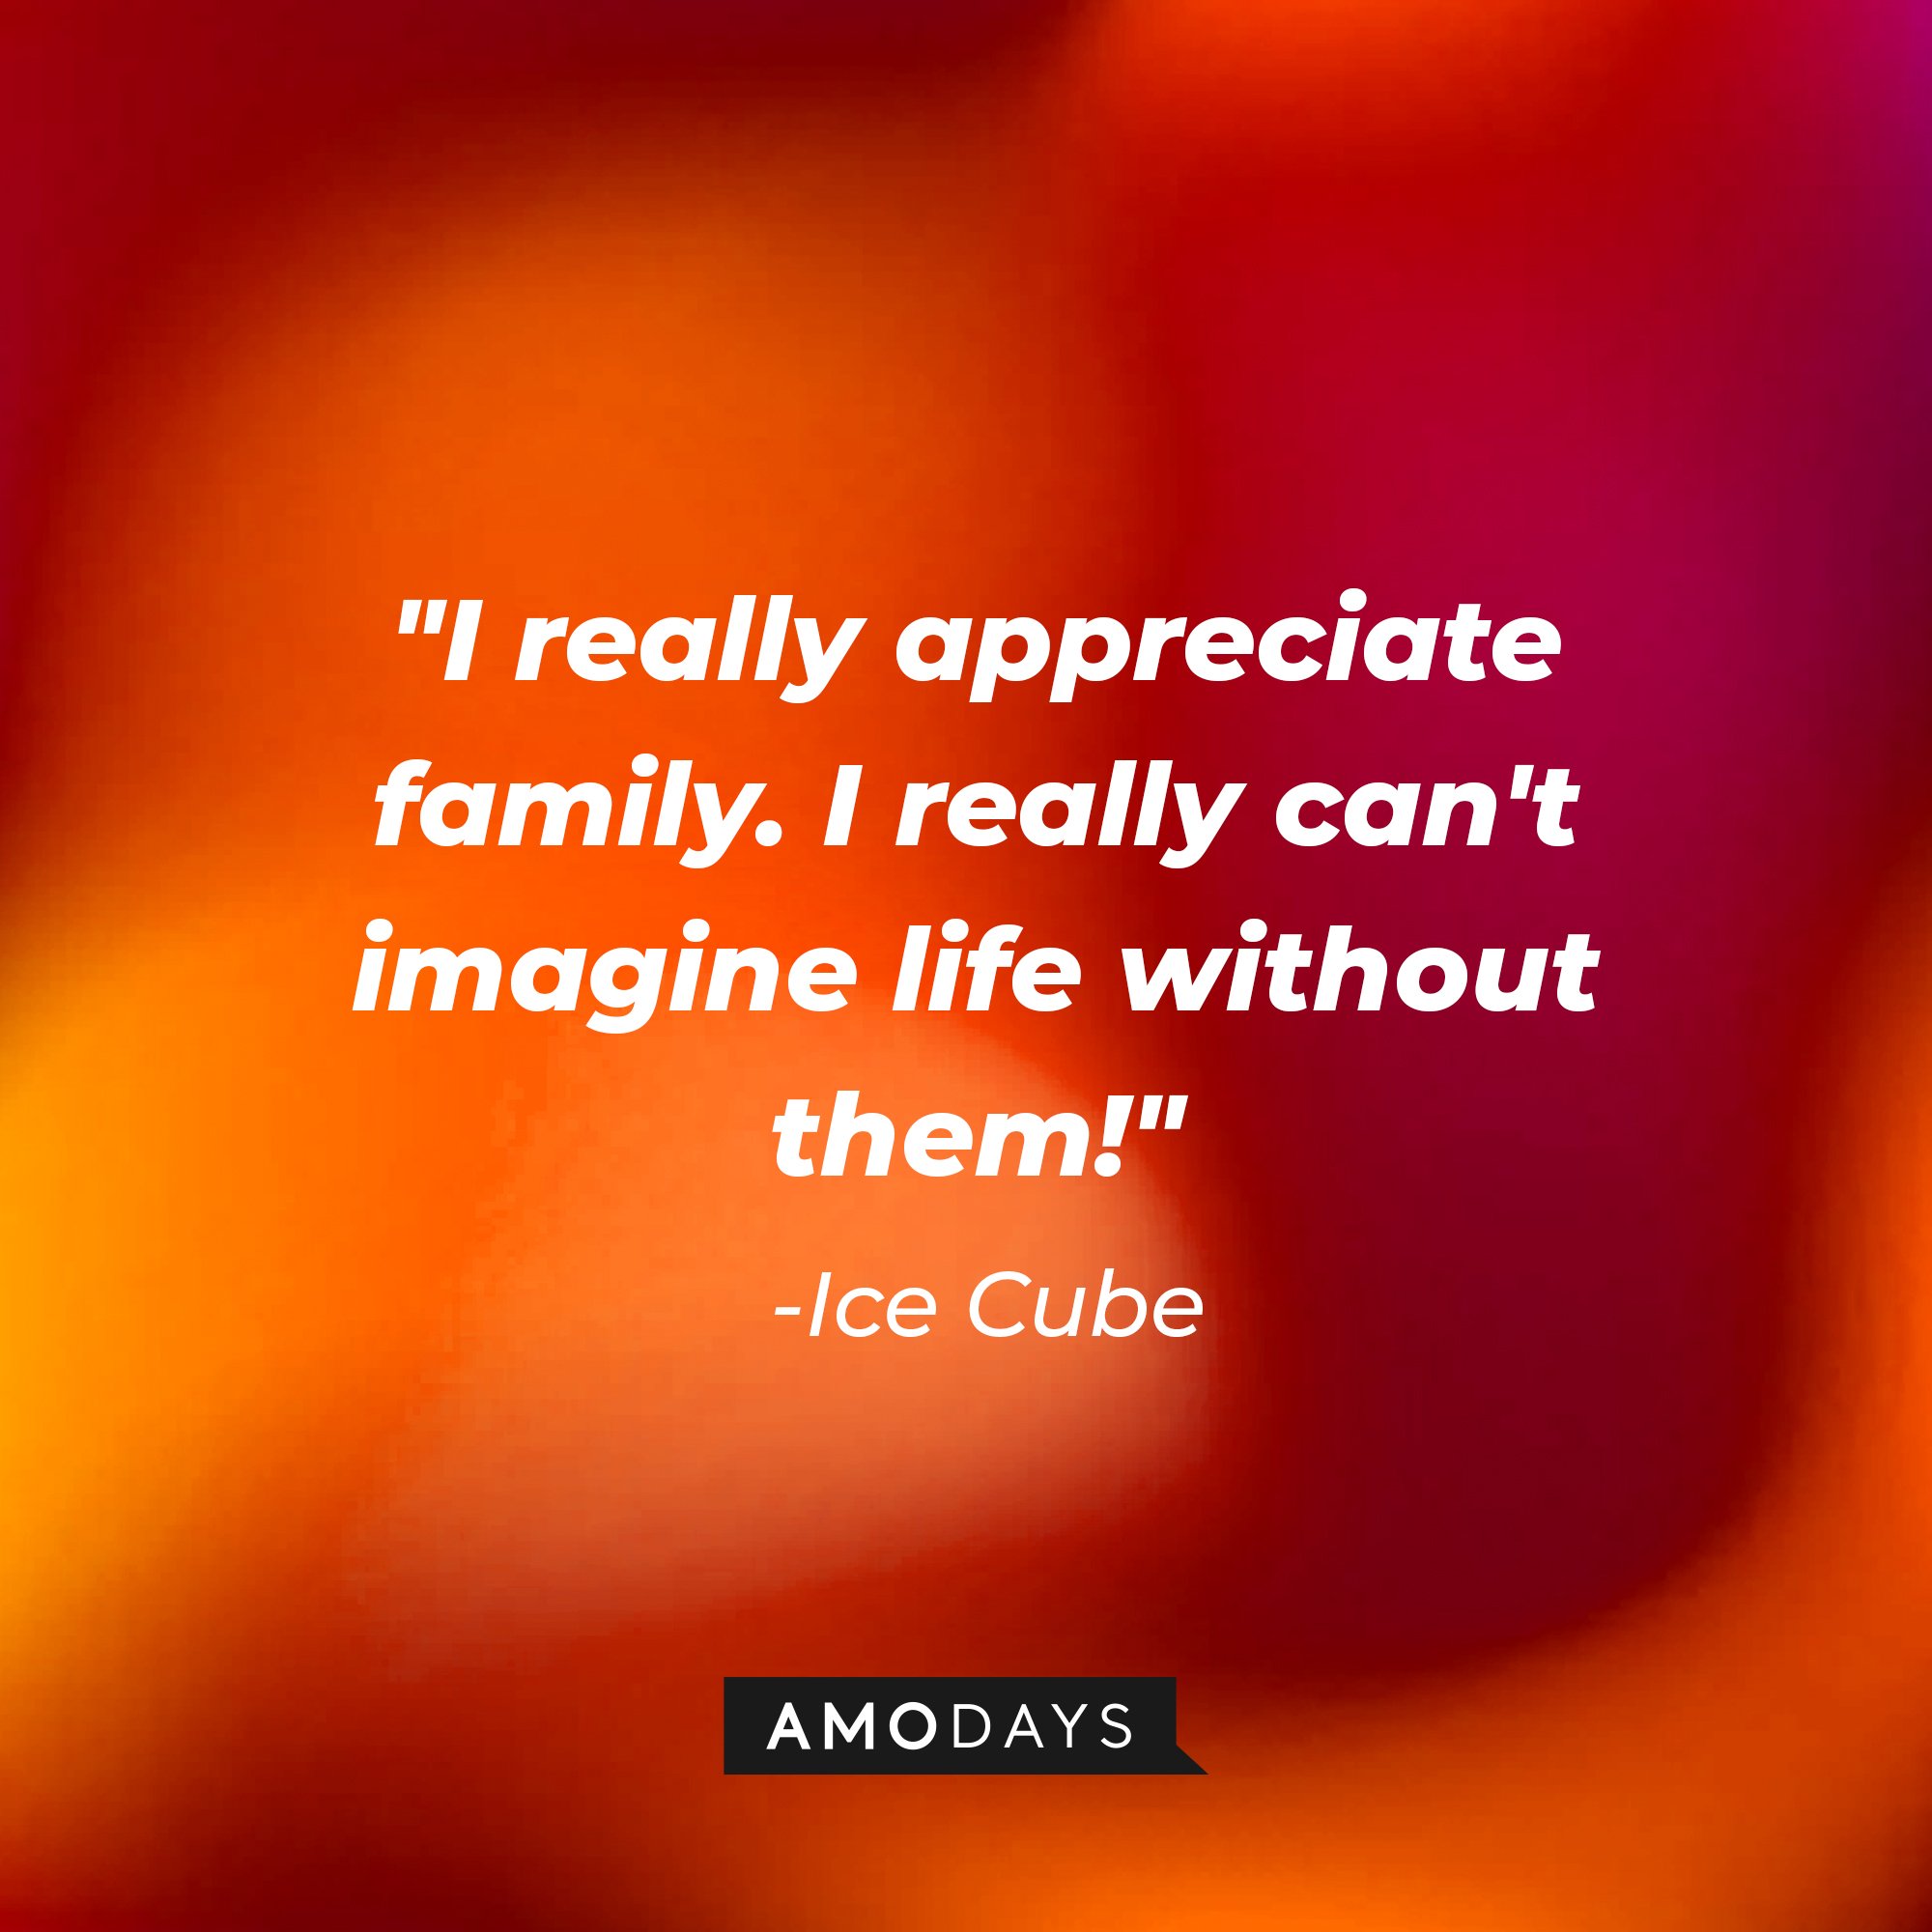 Ice Cube's quote: "I really appreciate family. I really can't imagine life without them!" — Ice Cube | Image: AmoDays